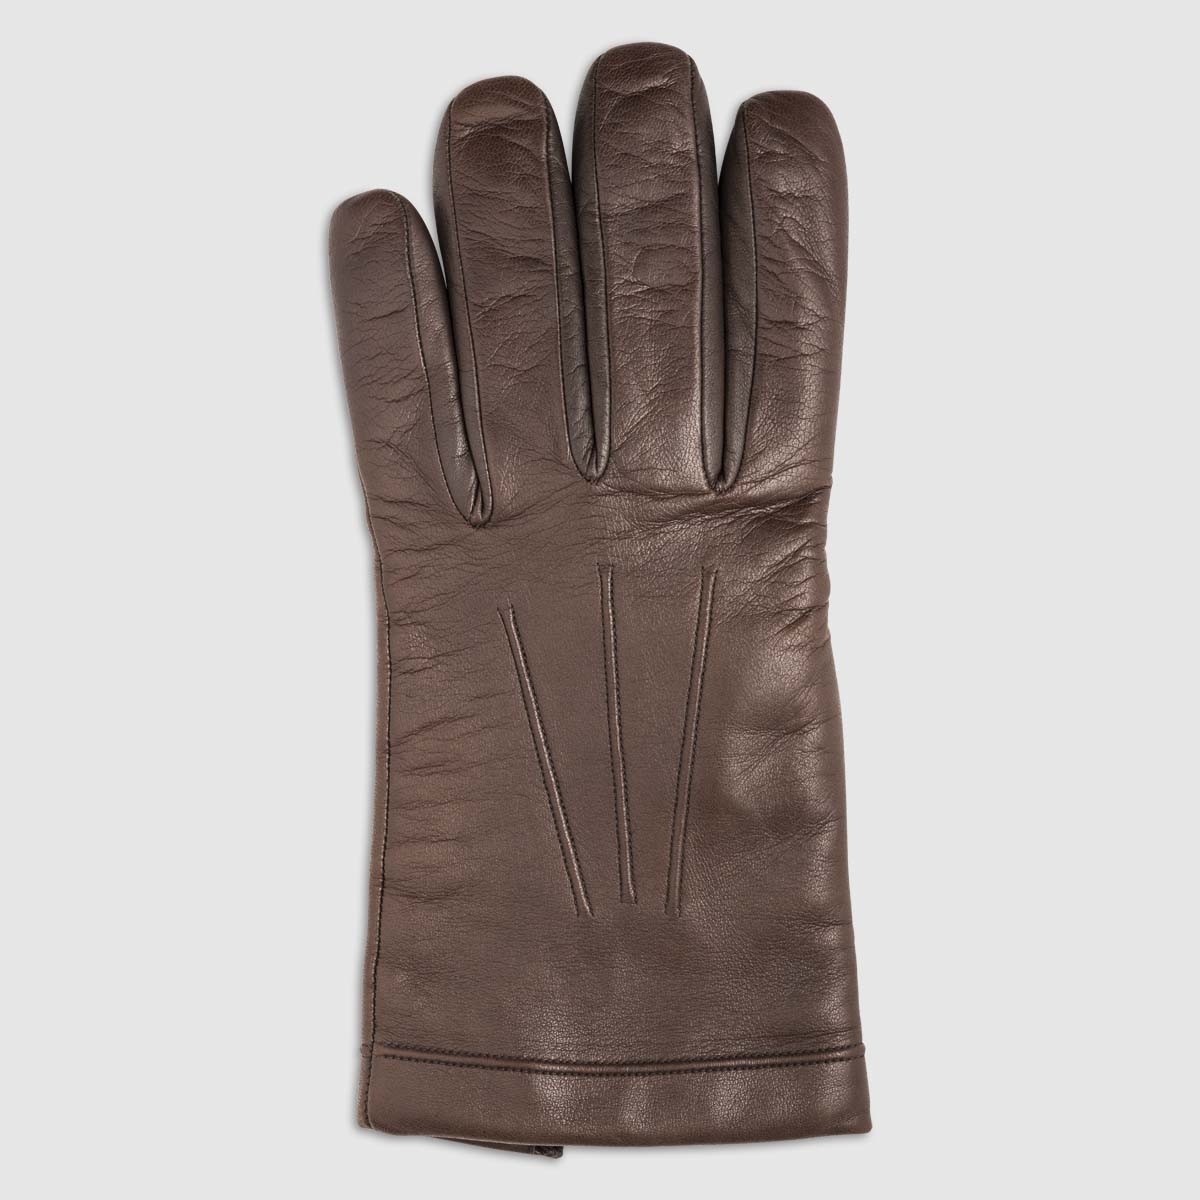 Nappa Leather Glove with Wool Lining Alpo Guanti on sale 2022